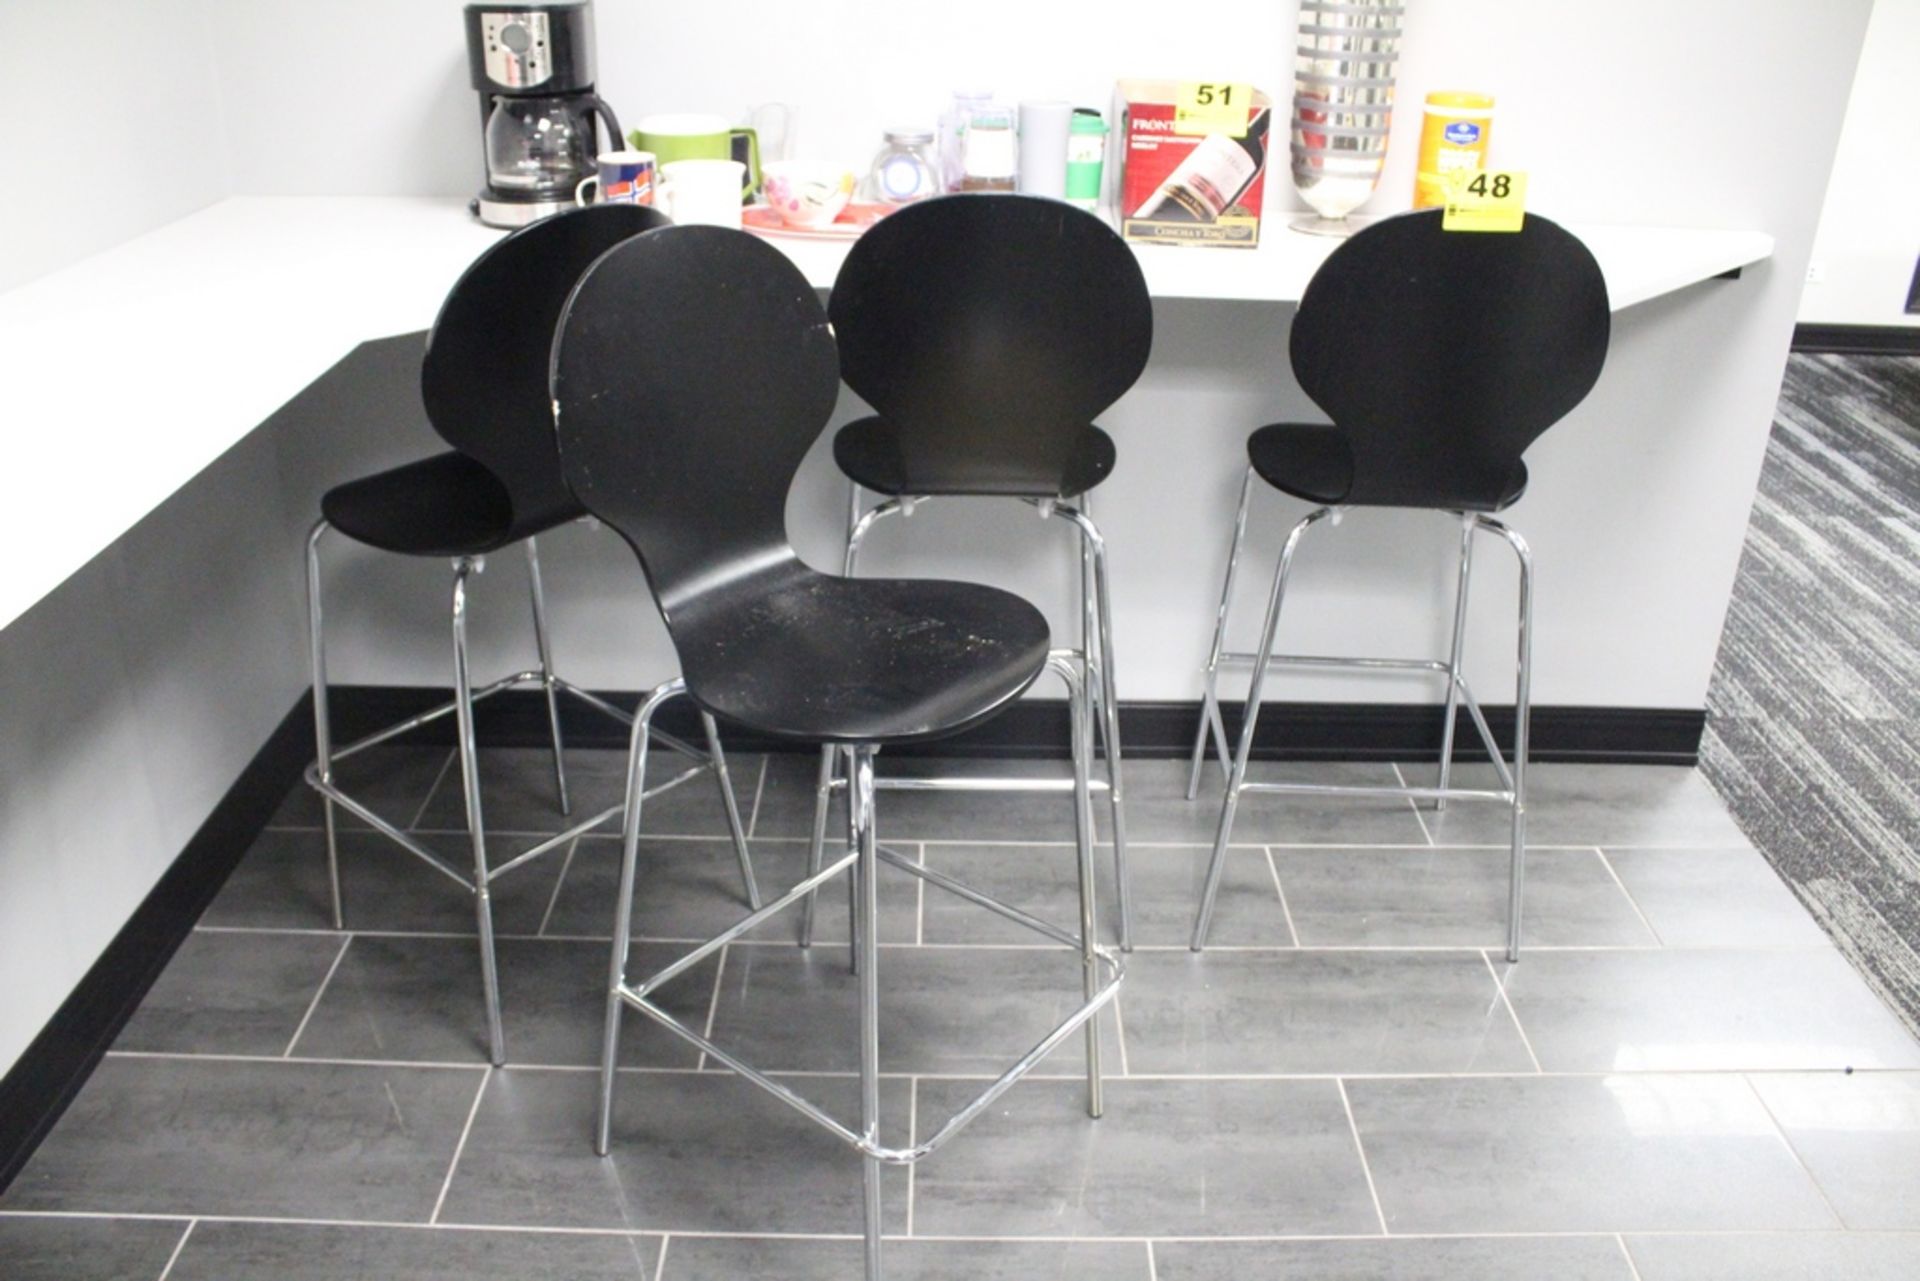 STAINLESS STEEL BAR STOOLS WITH WOOD SEATS